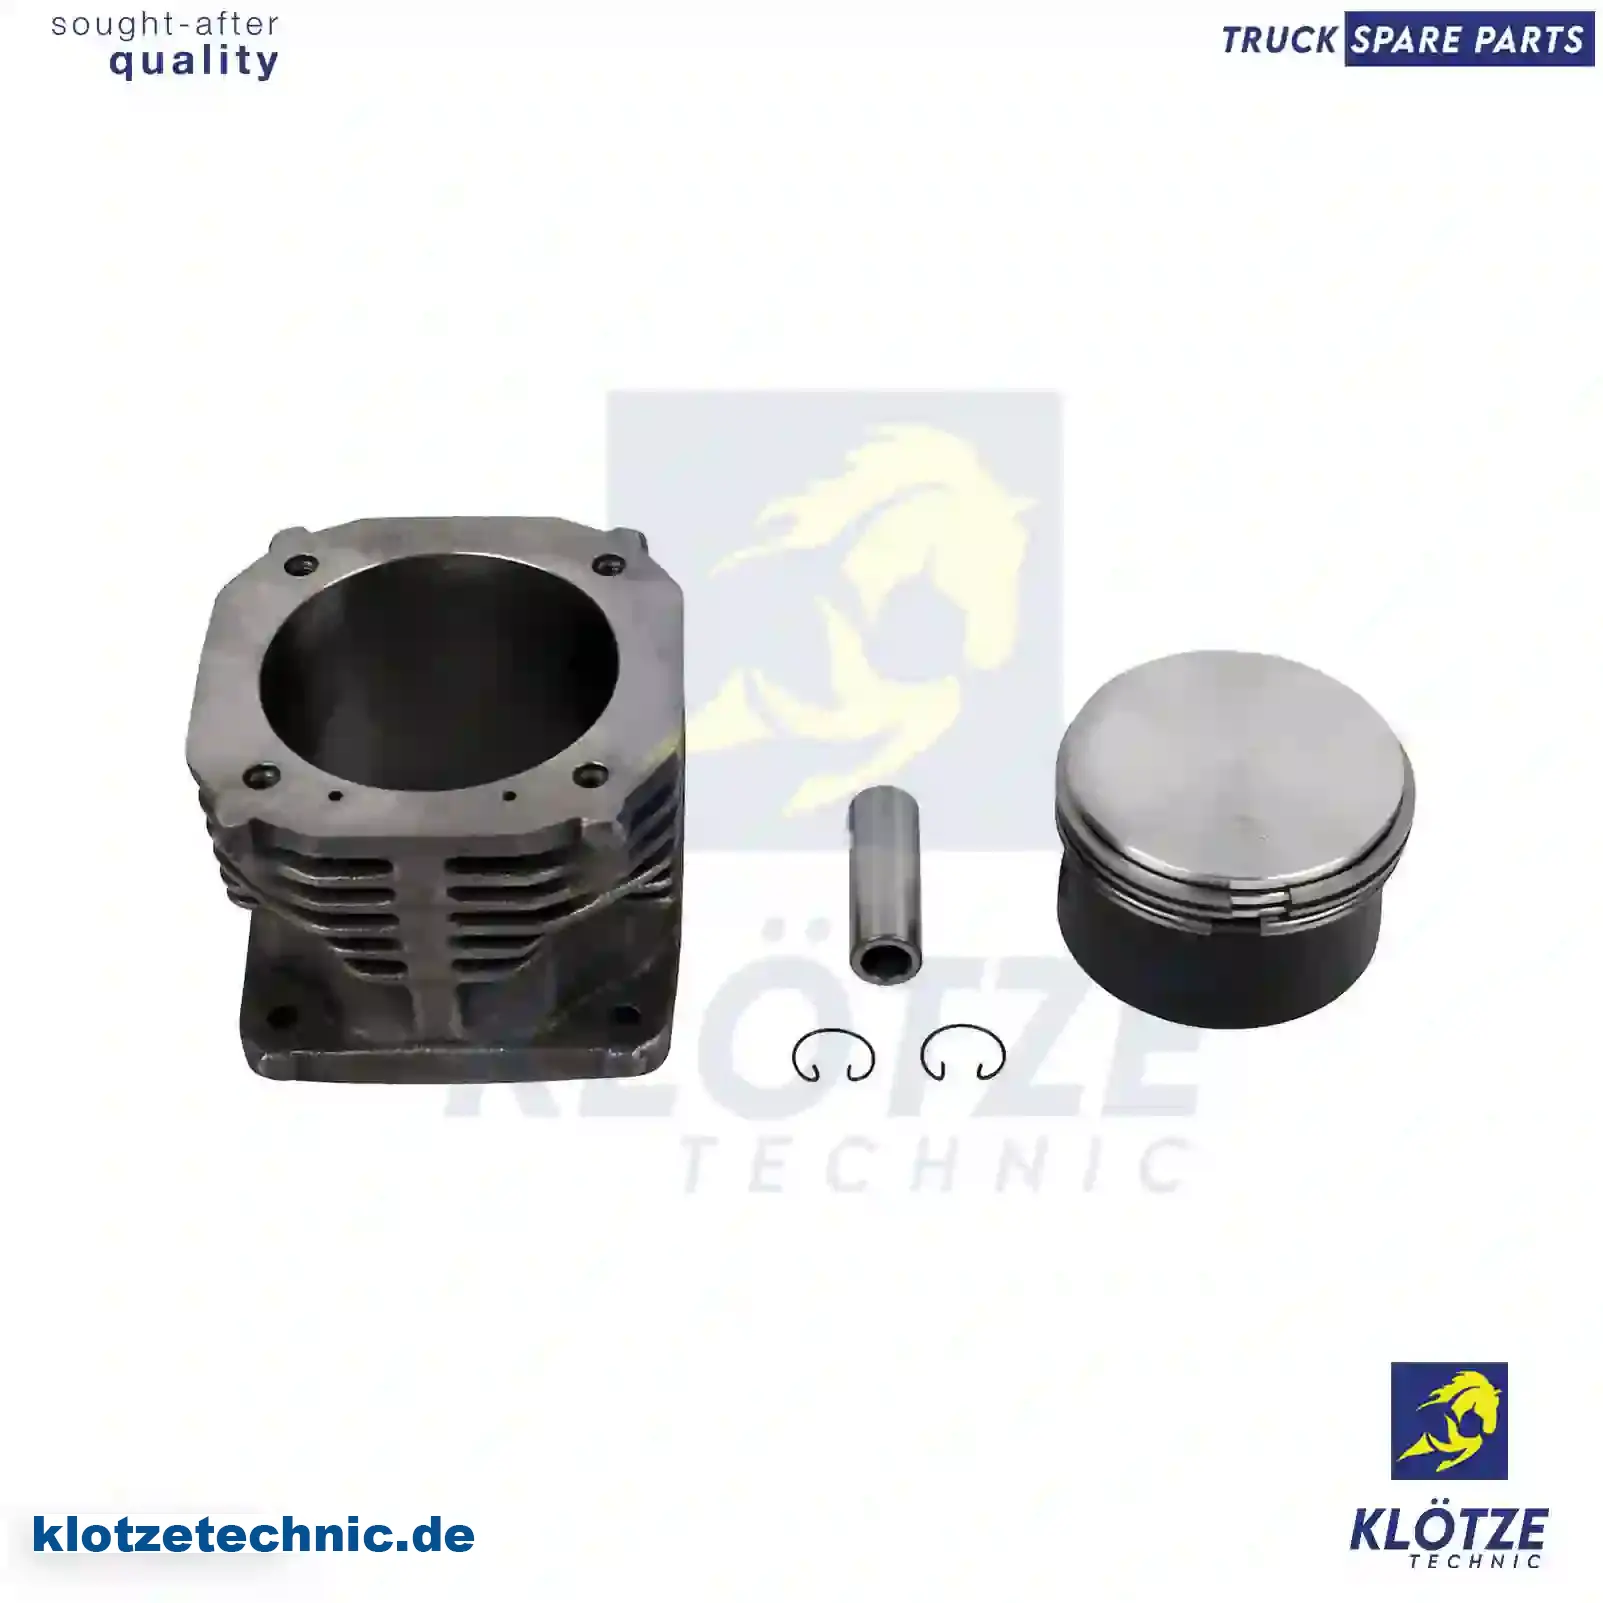 Piston and liner kit, air cooled, 51541050003, 51541050007, 51541056003, 51541056006, 51541190001, 51541190003, 51541190005, 51541190006, 51541190014, 51541197001, 51541197003, 51541197004, 4031300008, 4031300117, 4031310002, 4031311002, 4031312002, 4421300002, 4421300008, 4421300608, ZG50559-0008 || Klötze Technic